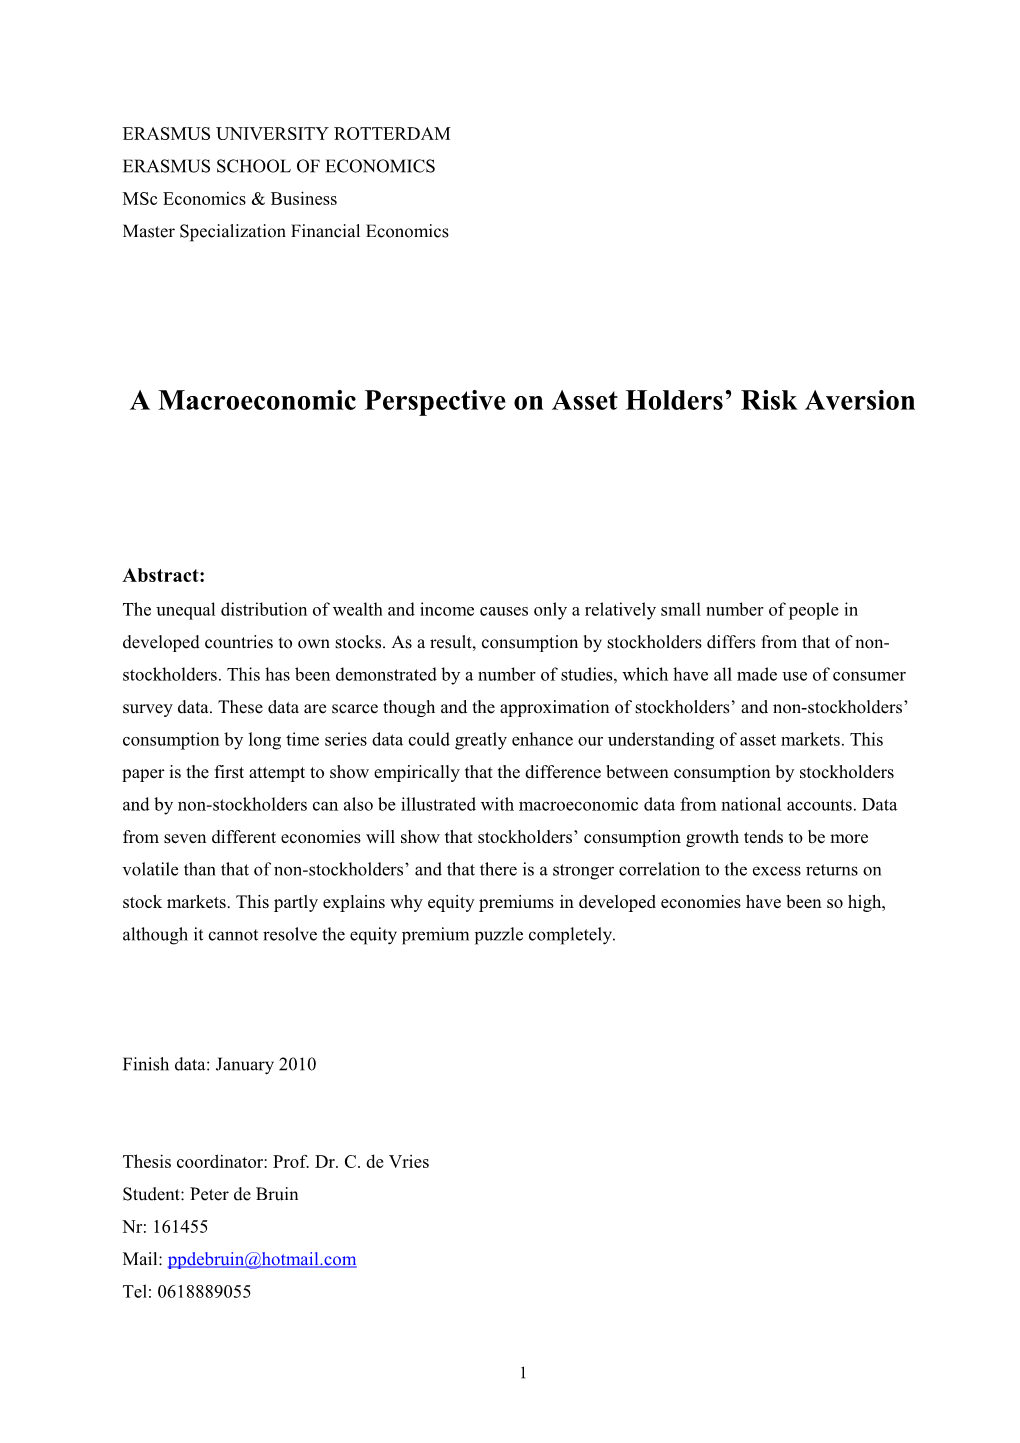 A Macroeconomic Perspective on Asset Holders Risk Aversion